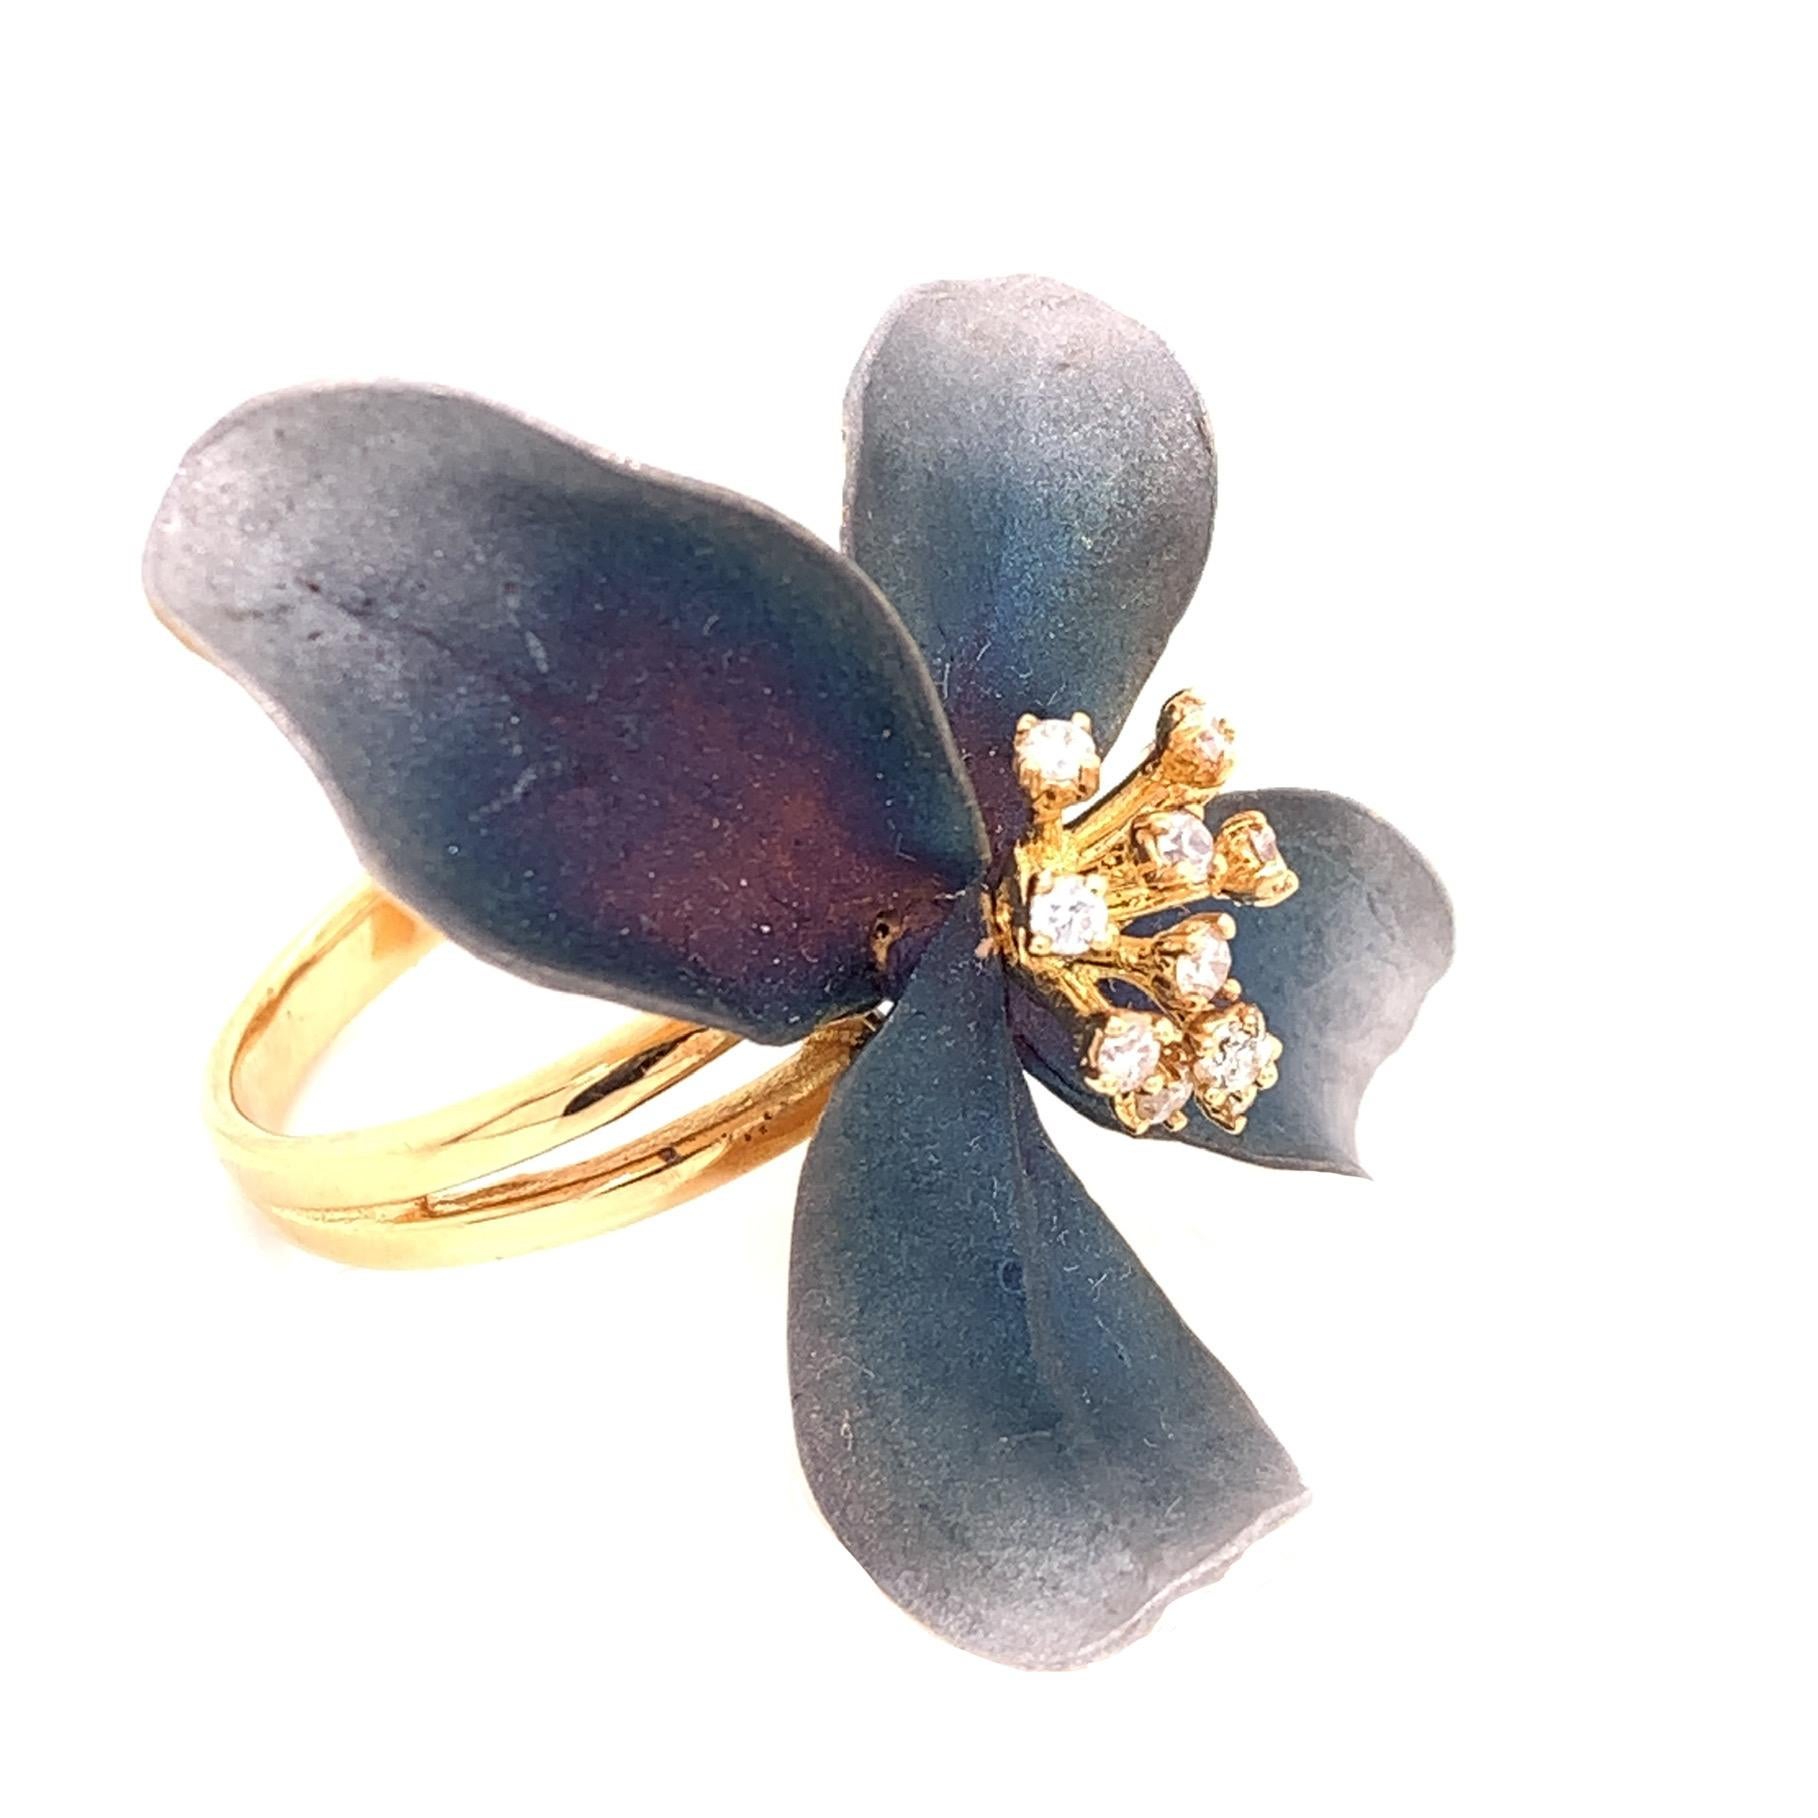 Gray-Brown Collection

Organic flower shape tainted gray rhodium ring with Diamonds set in 18K yellow gold. US size 6.75

Diamonds: 0.25ct total weight.
All Diamonds are G-H / SI stones
